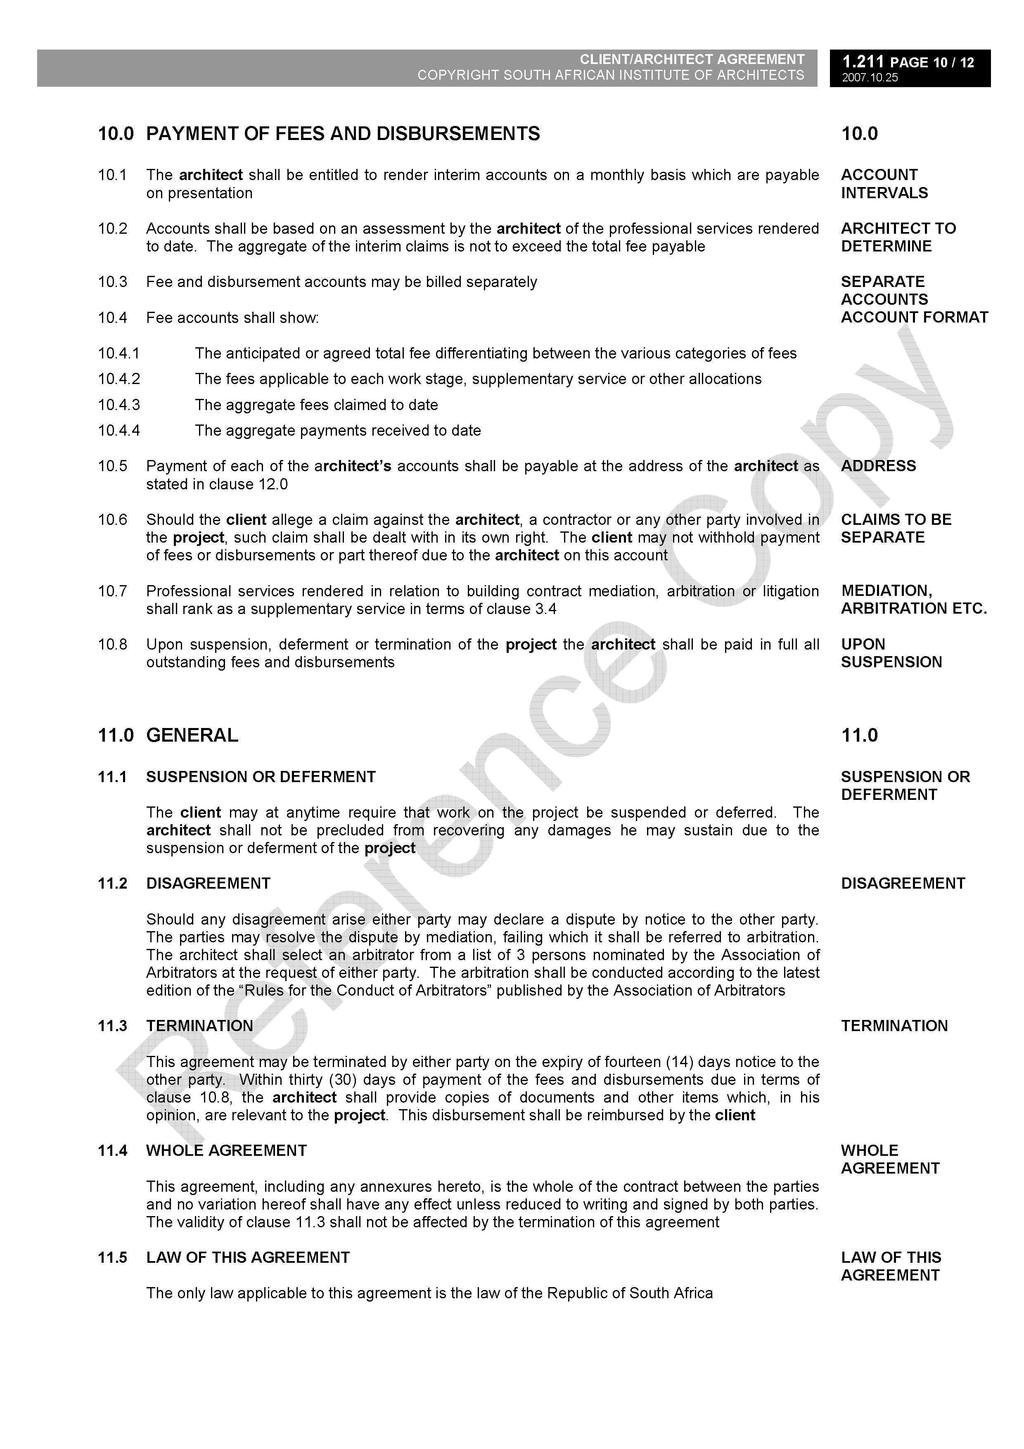 CLIENT/ACHITECT AGEEMENT COPYIGHT SOUTH AFICAN INSTITUTE OF ACHITECTS 1.211 PAGE 10/12 10.0 PAYMENT OF FEES AND DISBUSEMENTS 10.0 10.